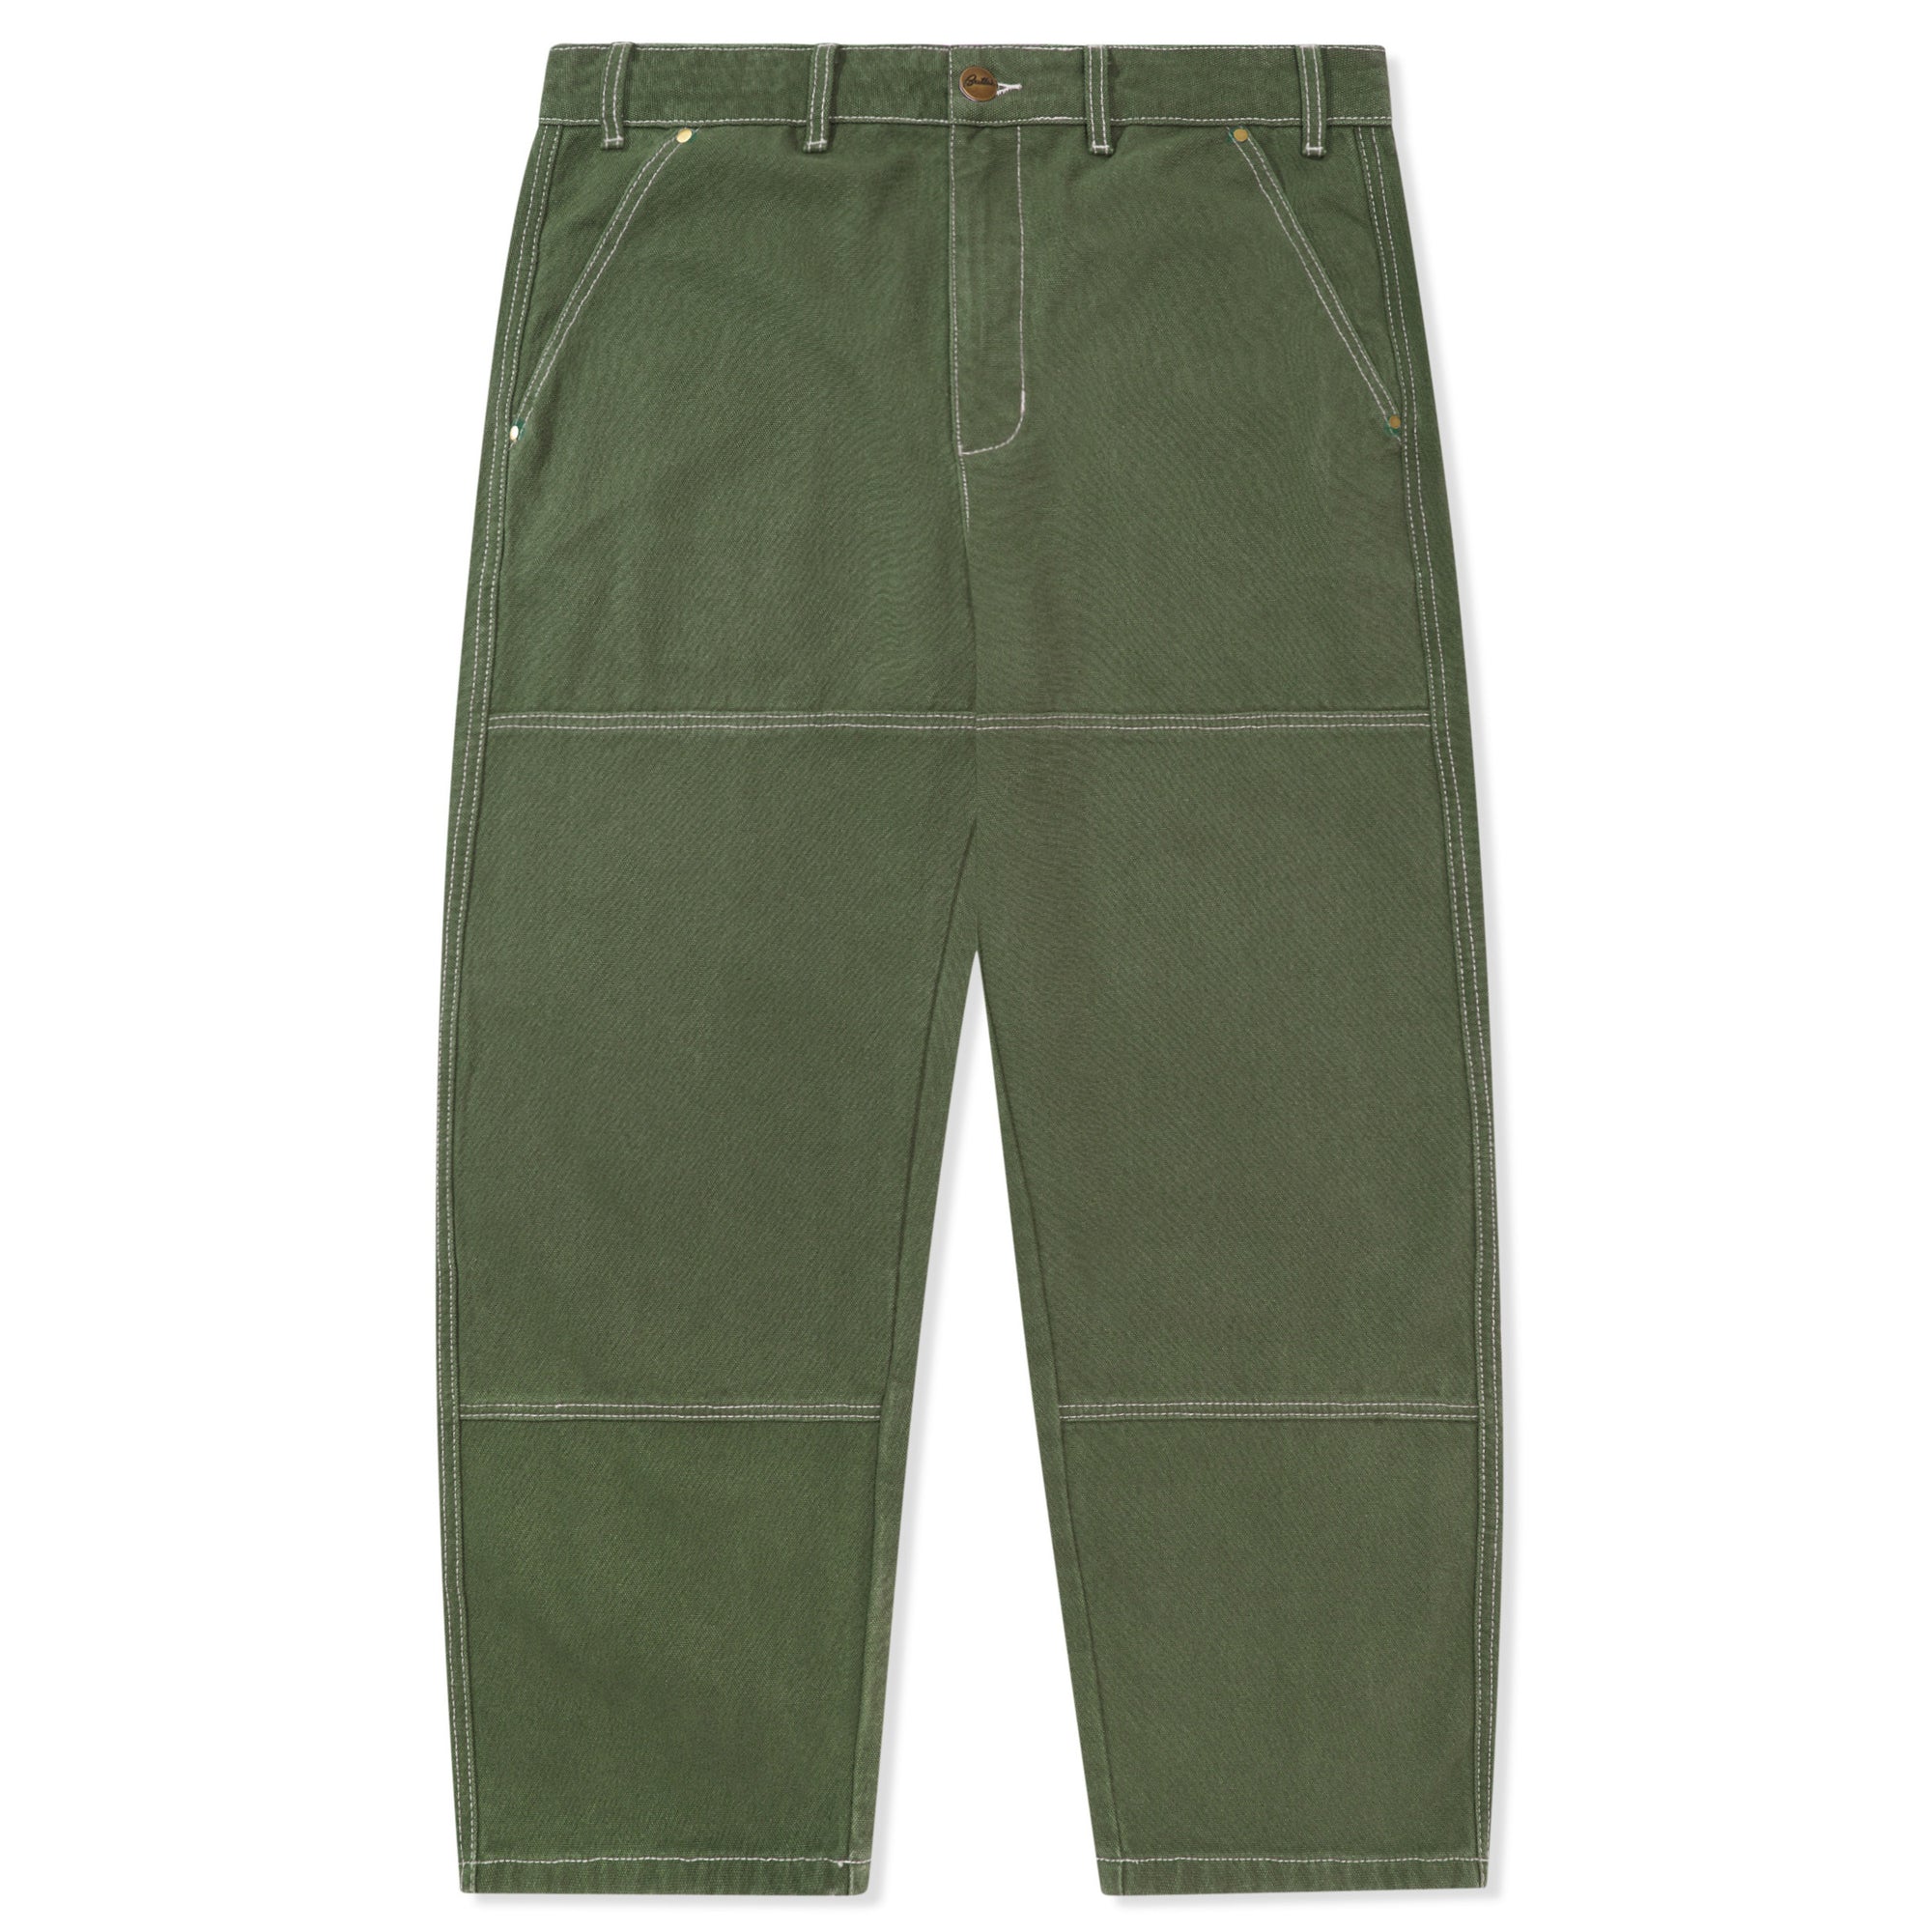 Butter Goods Work Double Knee Pants Washed Army